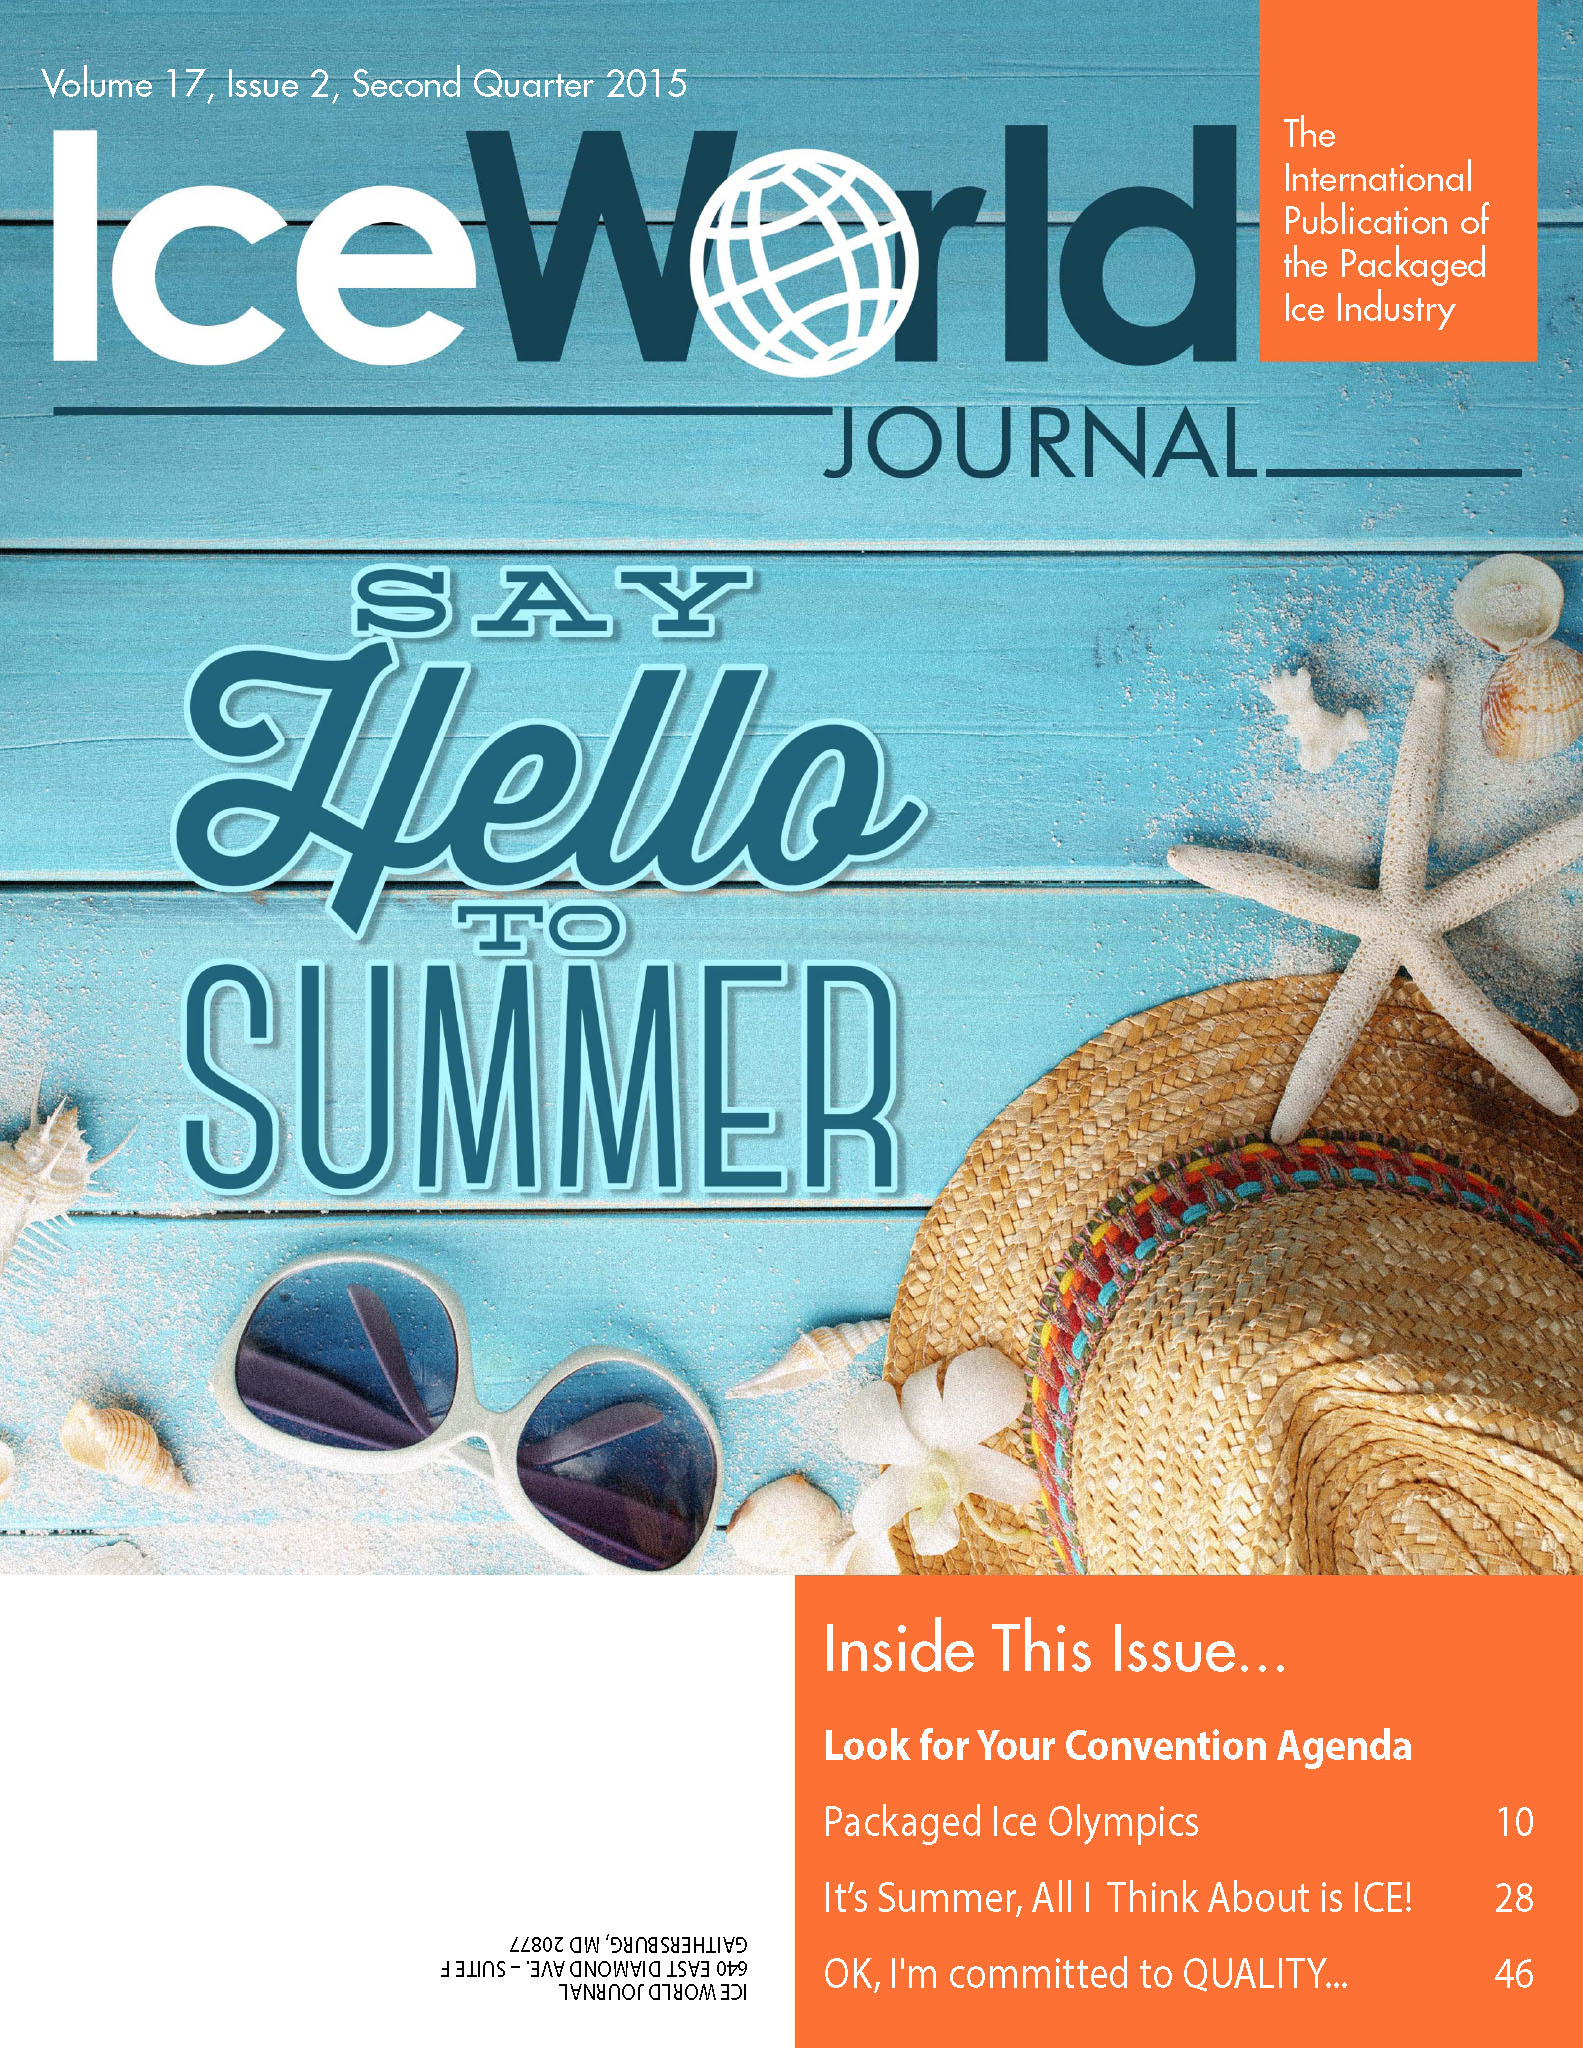 Ice World Journal The International Publication of the Packaged Ice Industry